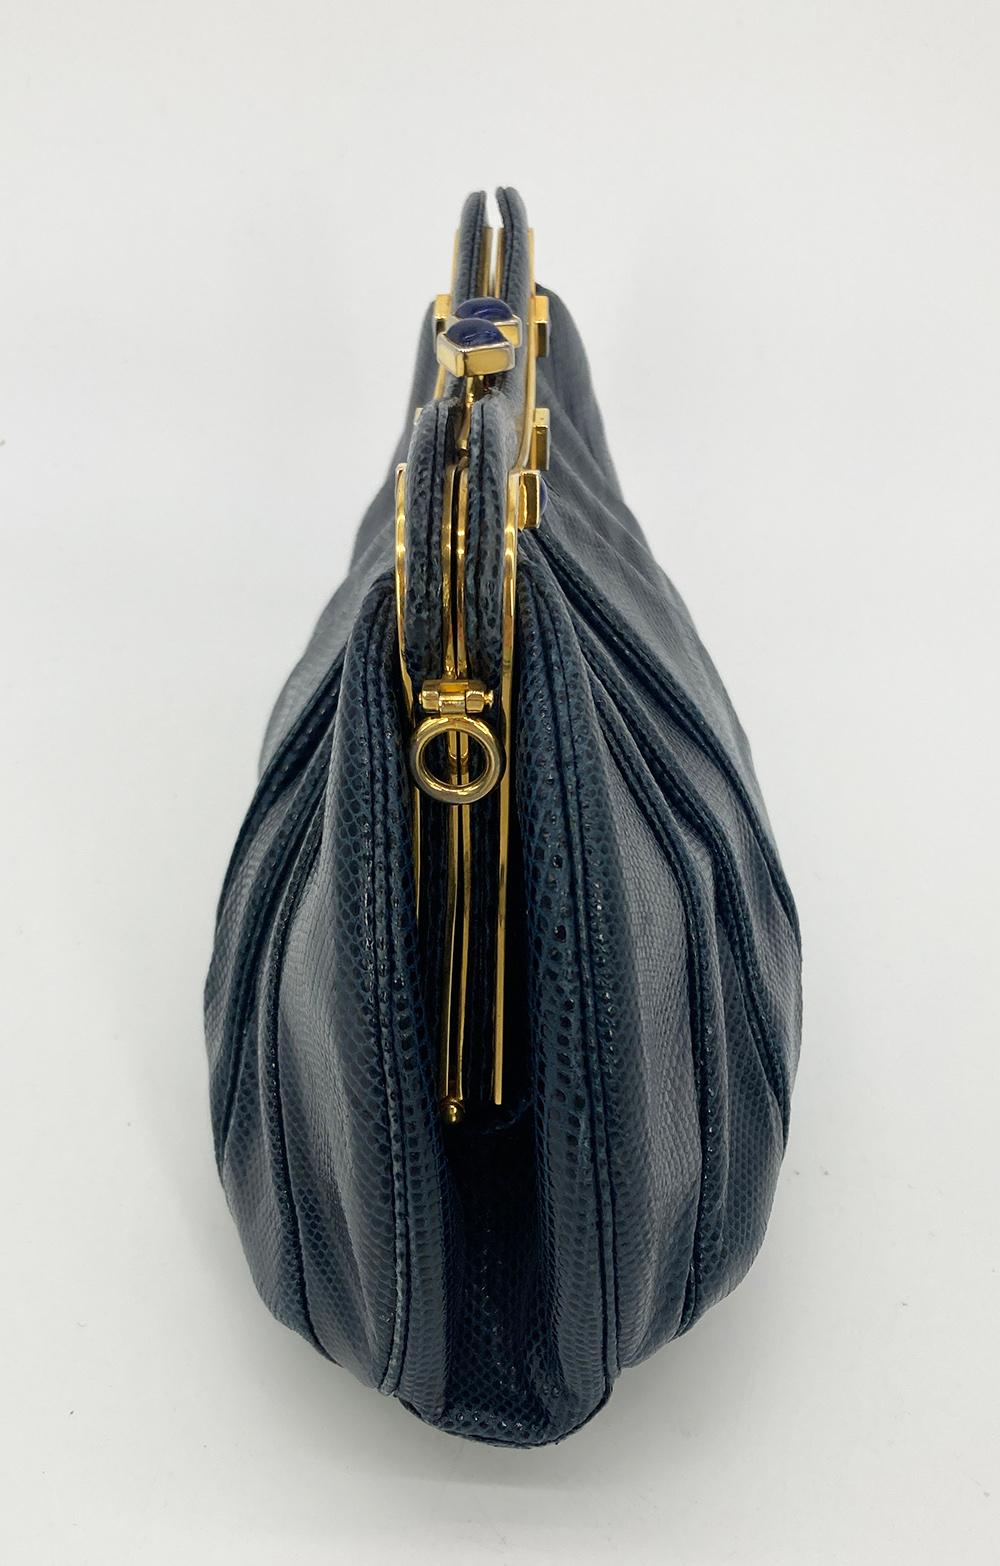 Judith Leiber Navy Lizard Clutch in very good condition. navy lizard trimmed with gold hardware and lapis gemstones along top edge. Kiss lock top closure opens to a navy nylon interior with one zip and one slit side pockets. overall very good